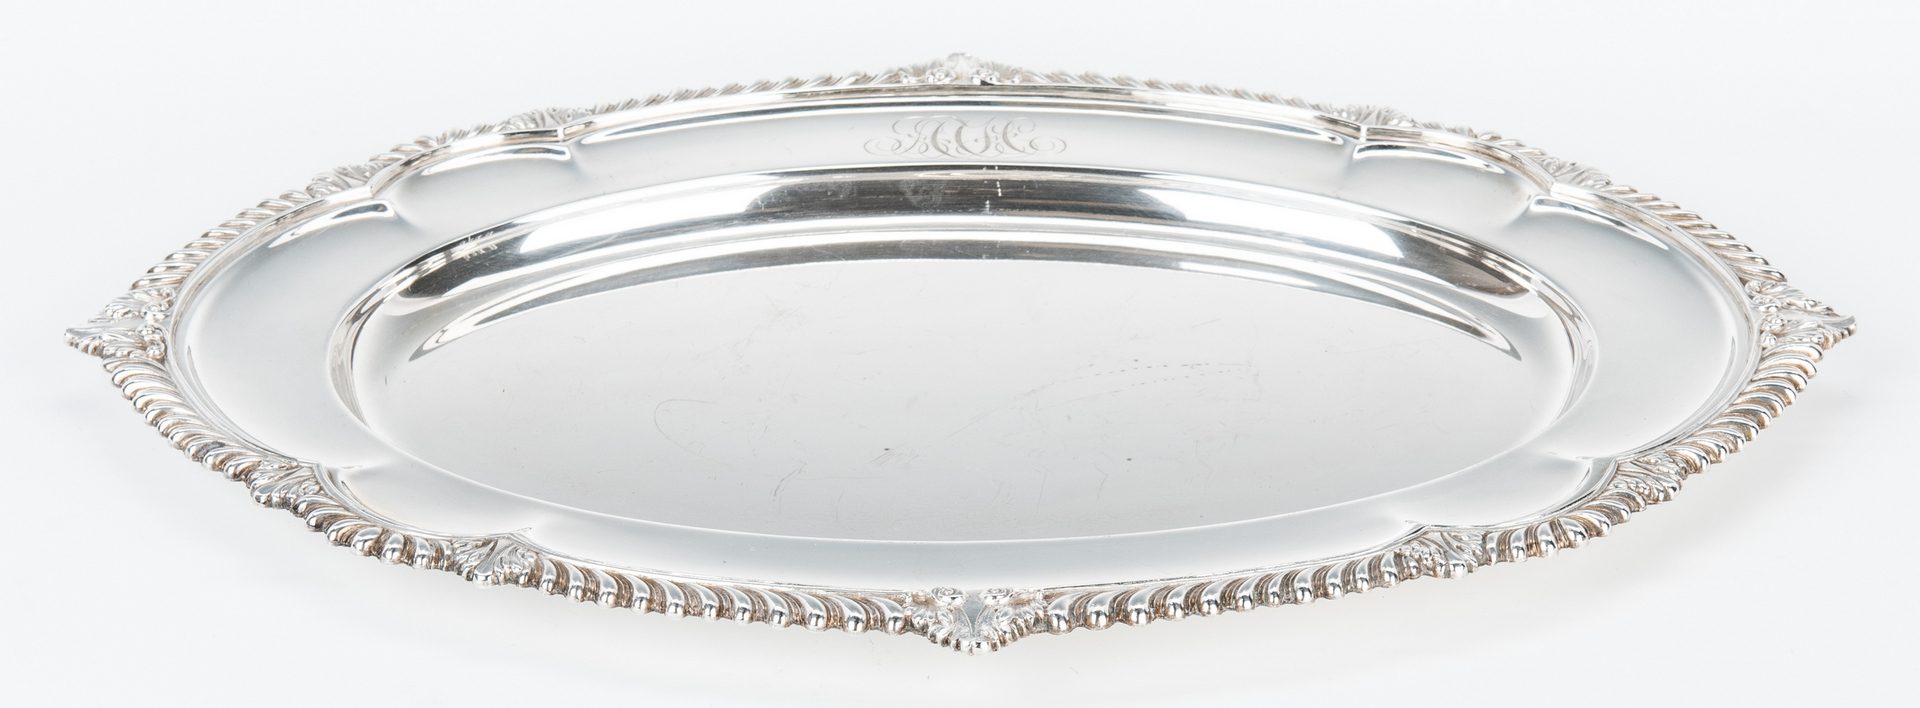 Lot 424: Gorham 16" Sterling Silver Oval Tray